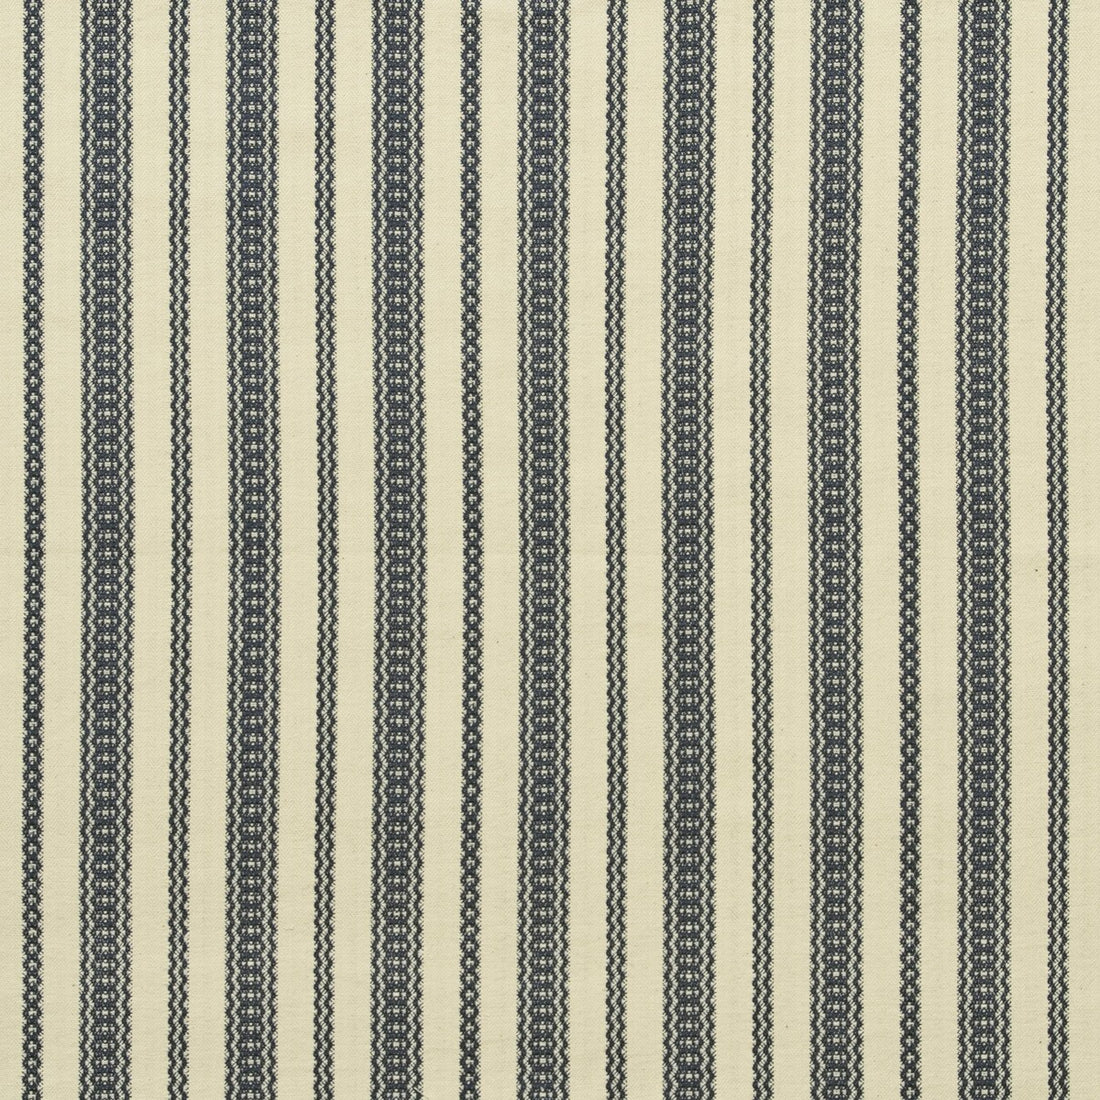 Payson fabric in navy color - pattern BFC-3676.50.0 - by Lee Jofa in the Blithfield collection